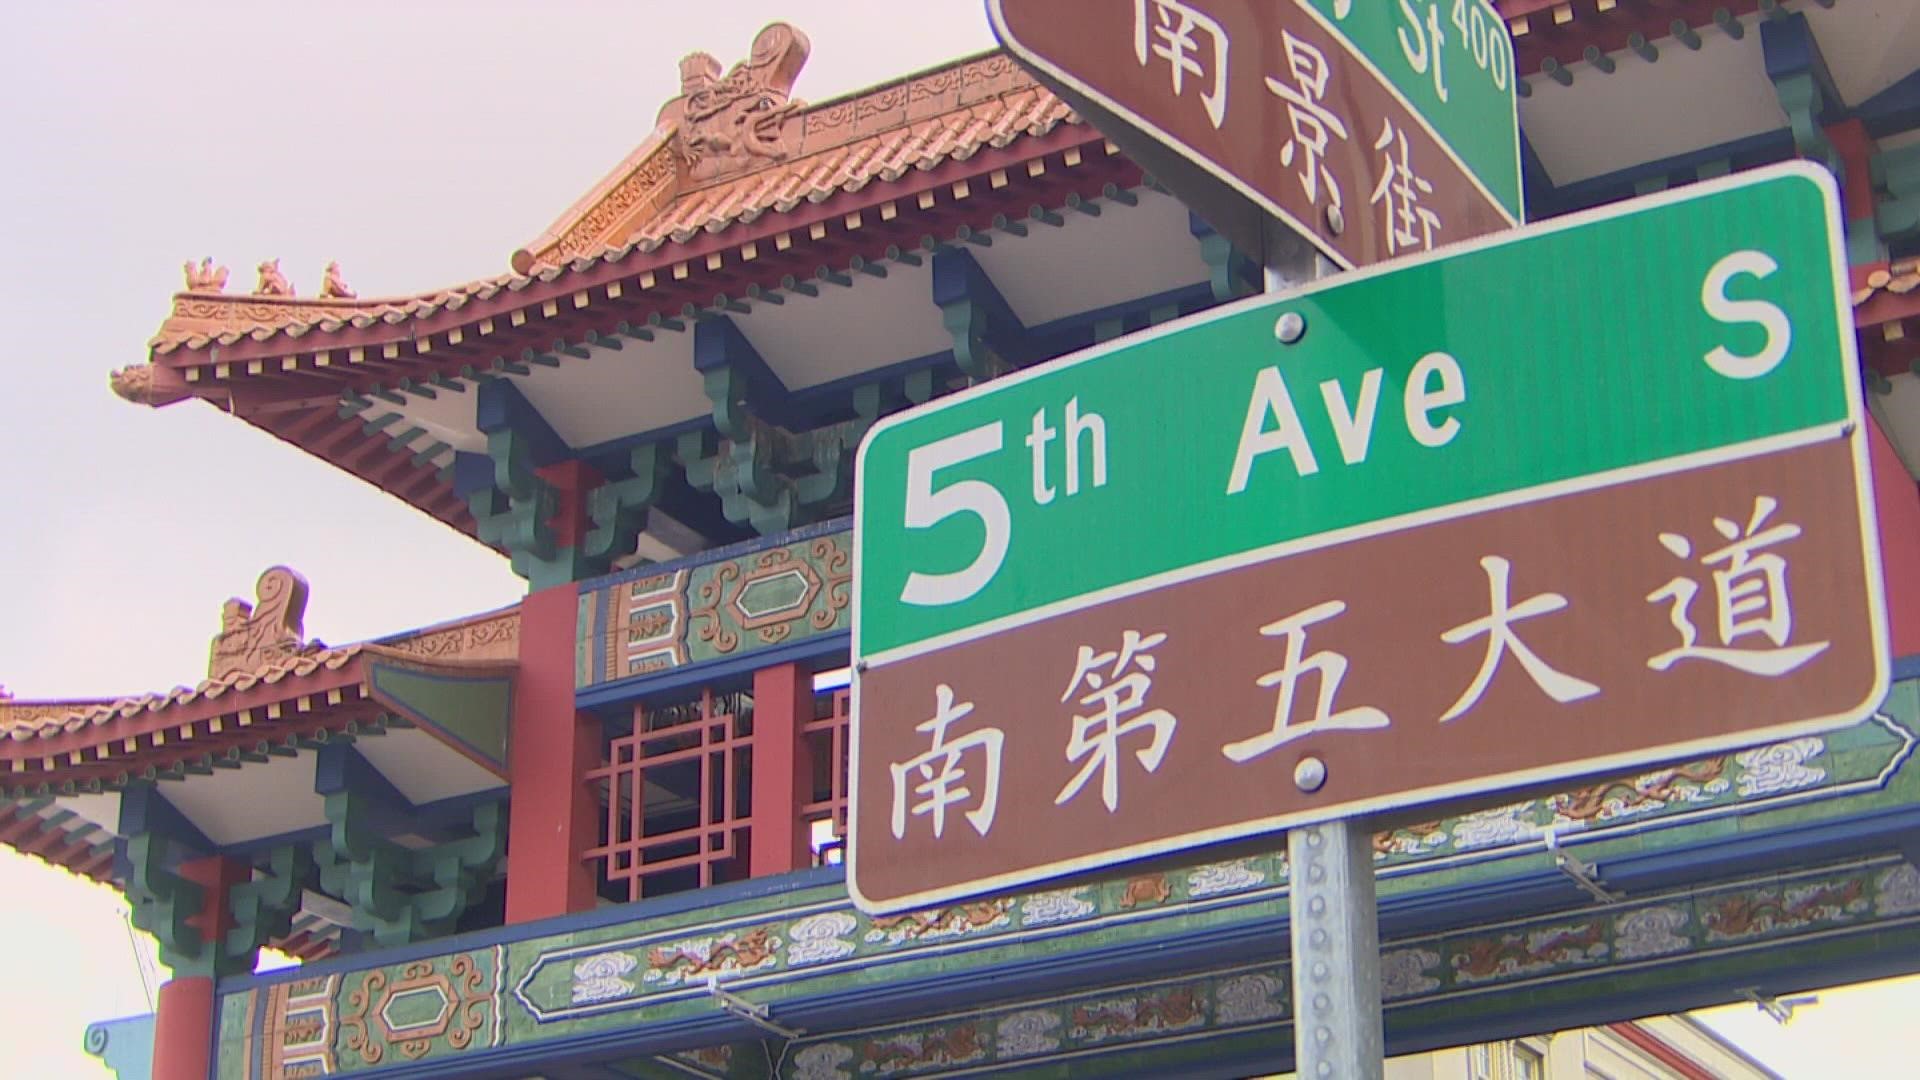 Final decisions about the project are expected next year. People who live and work in Chinatown-International District say it is all happening too fast.